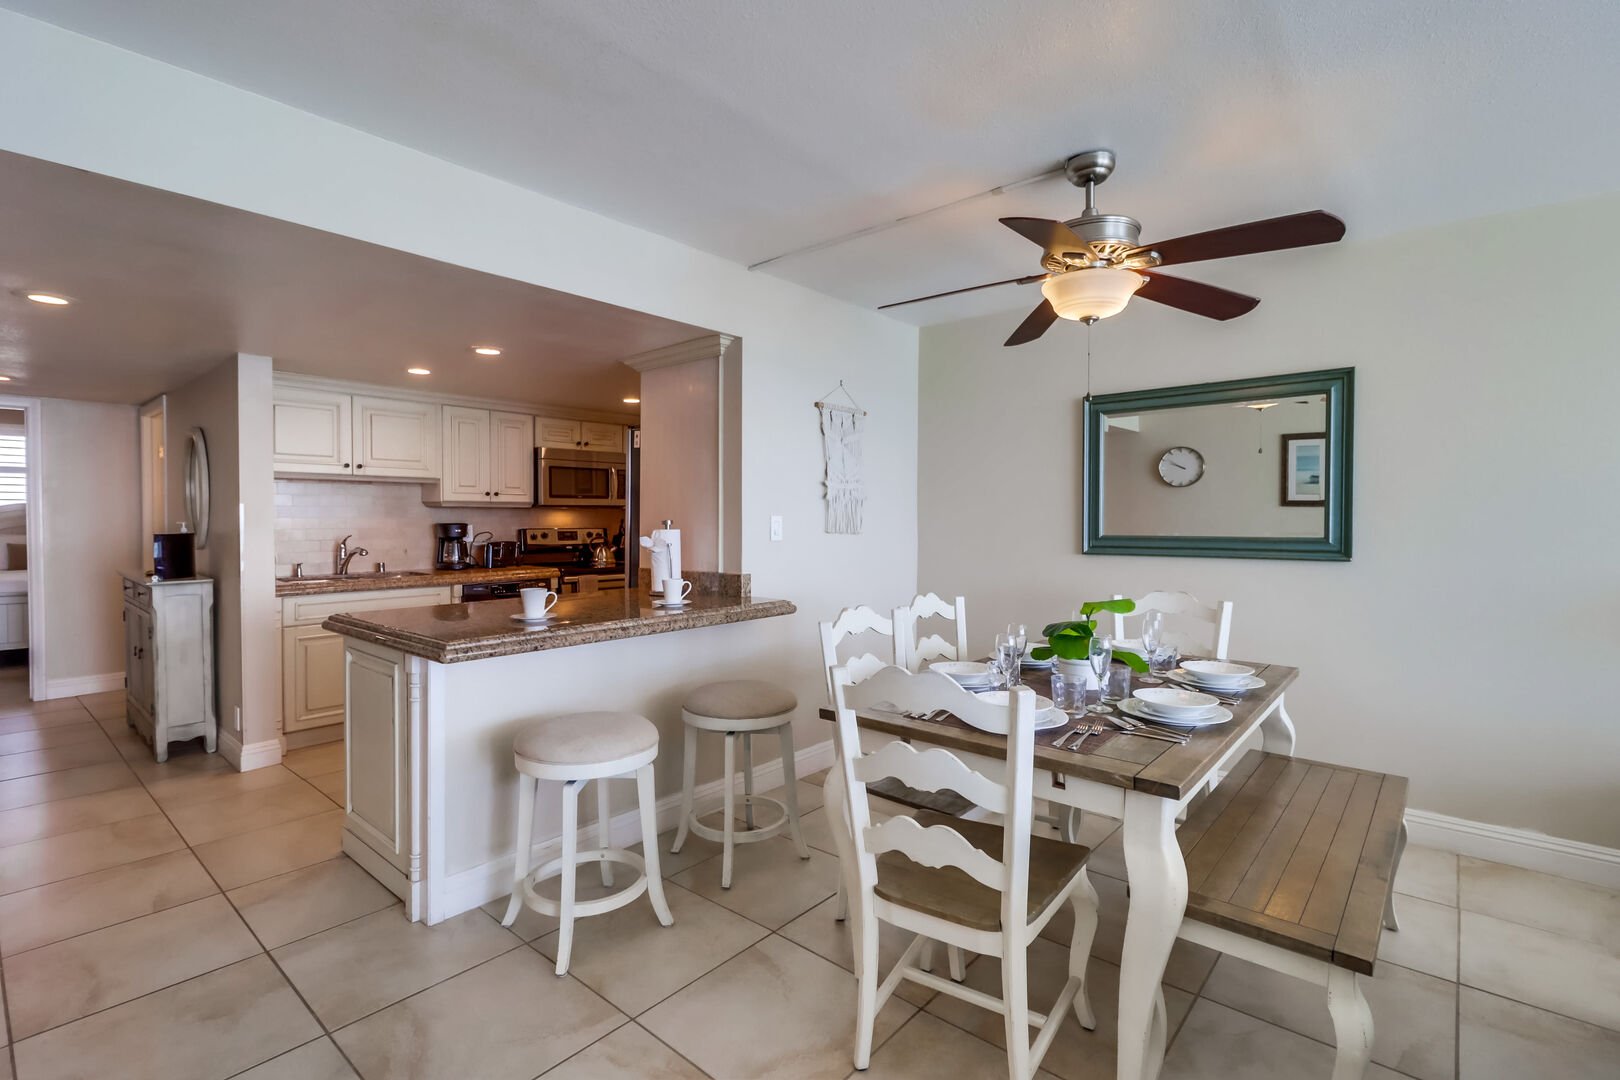 Open, California-style kitchen and dining with all you need for meals at home!